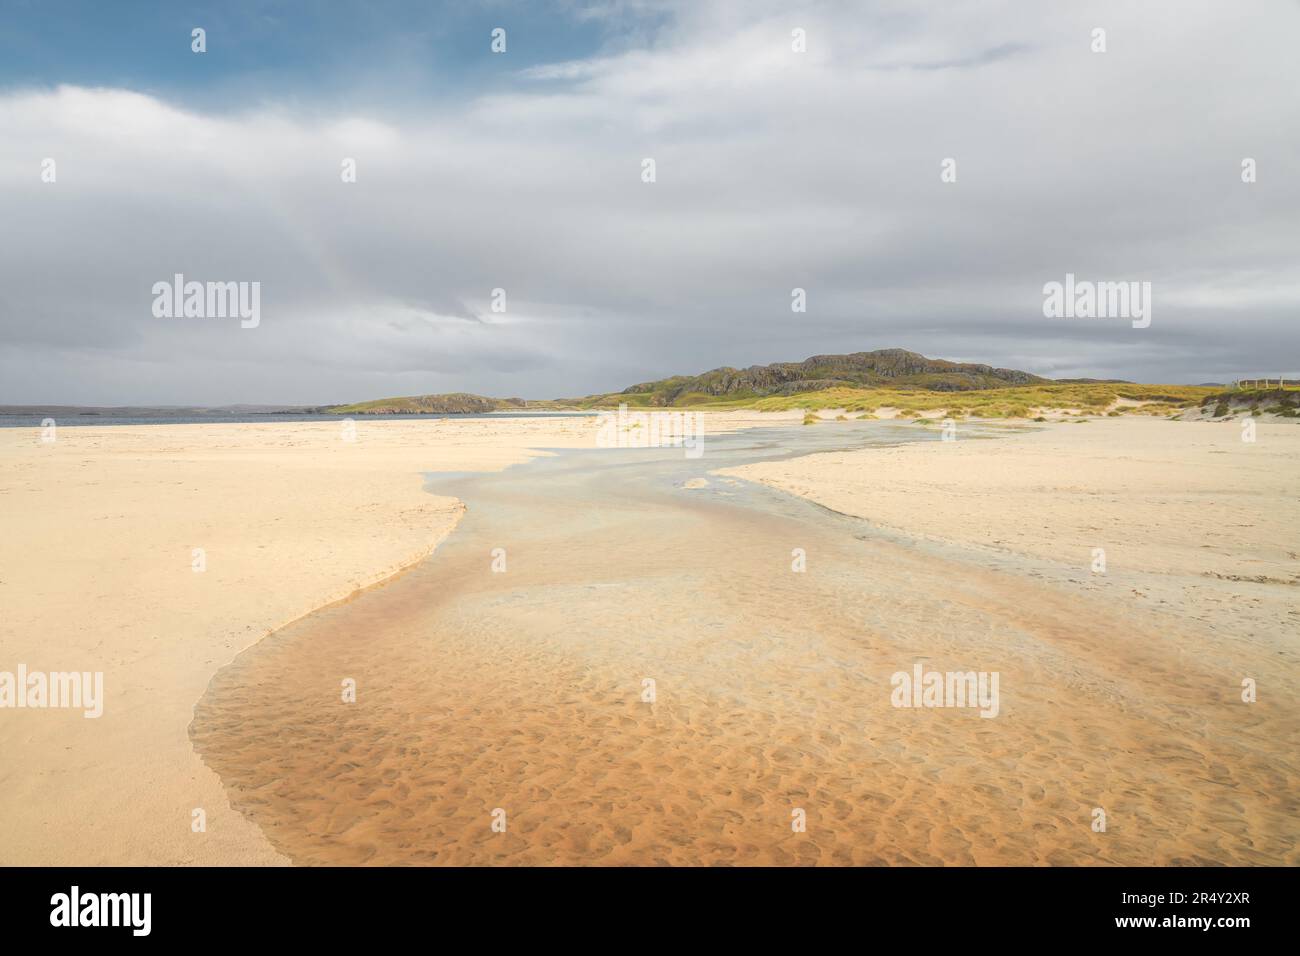 Seascape at low tide along the sandy beach of Reef Beach on the Isle of Lewis and Harris in the Outer Hebrides of Scotland, UK. Stock Photo